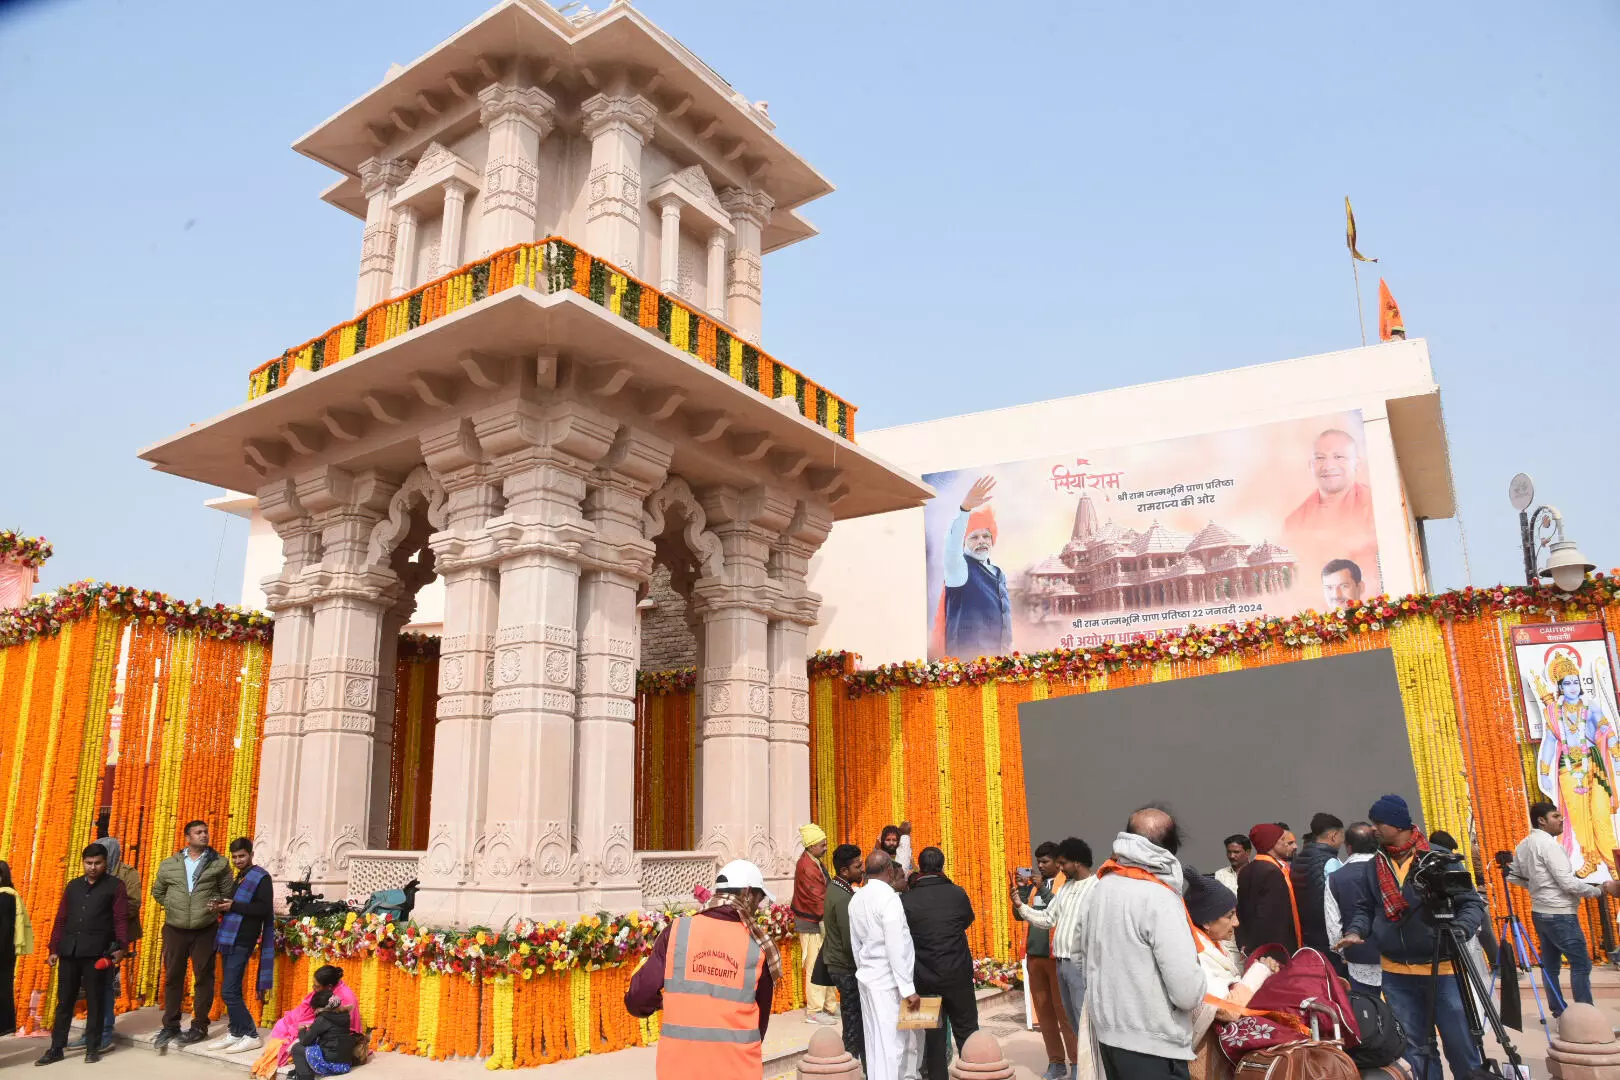 Engineering giant L&T designed, and constructed Ayodhya Ram Temple